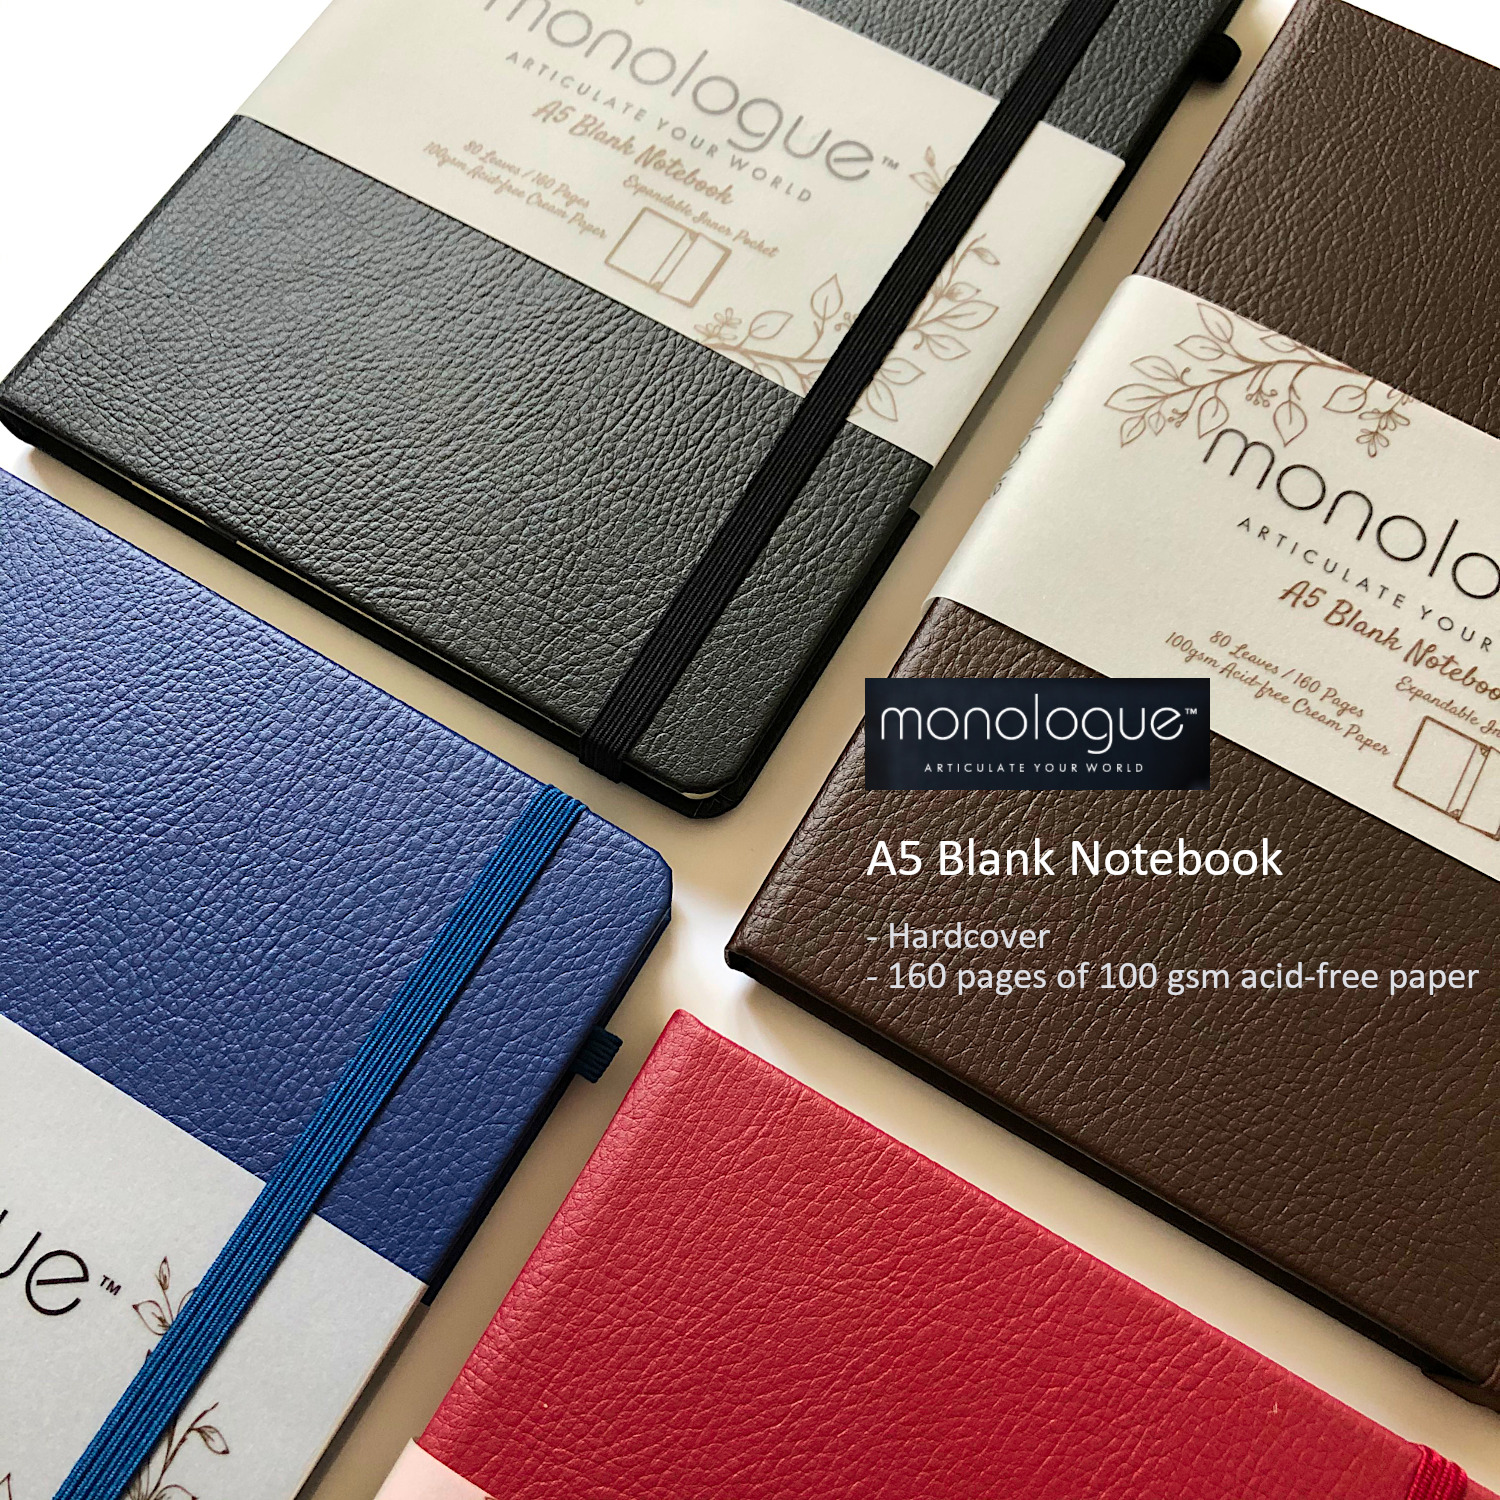 monologue-a5-blank-notebook-160-pages-100-gsm-acid-free-paper-with